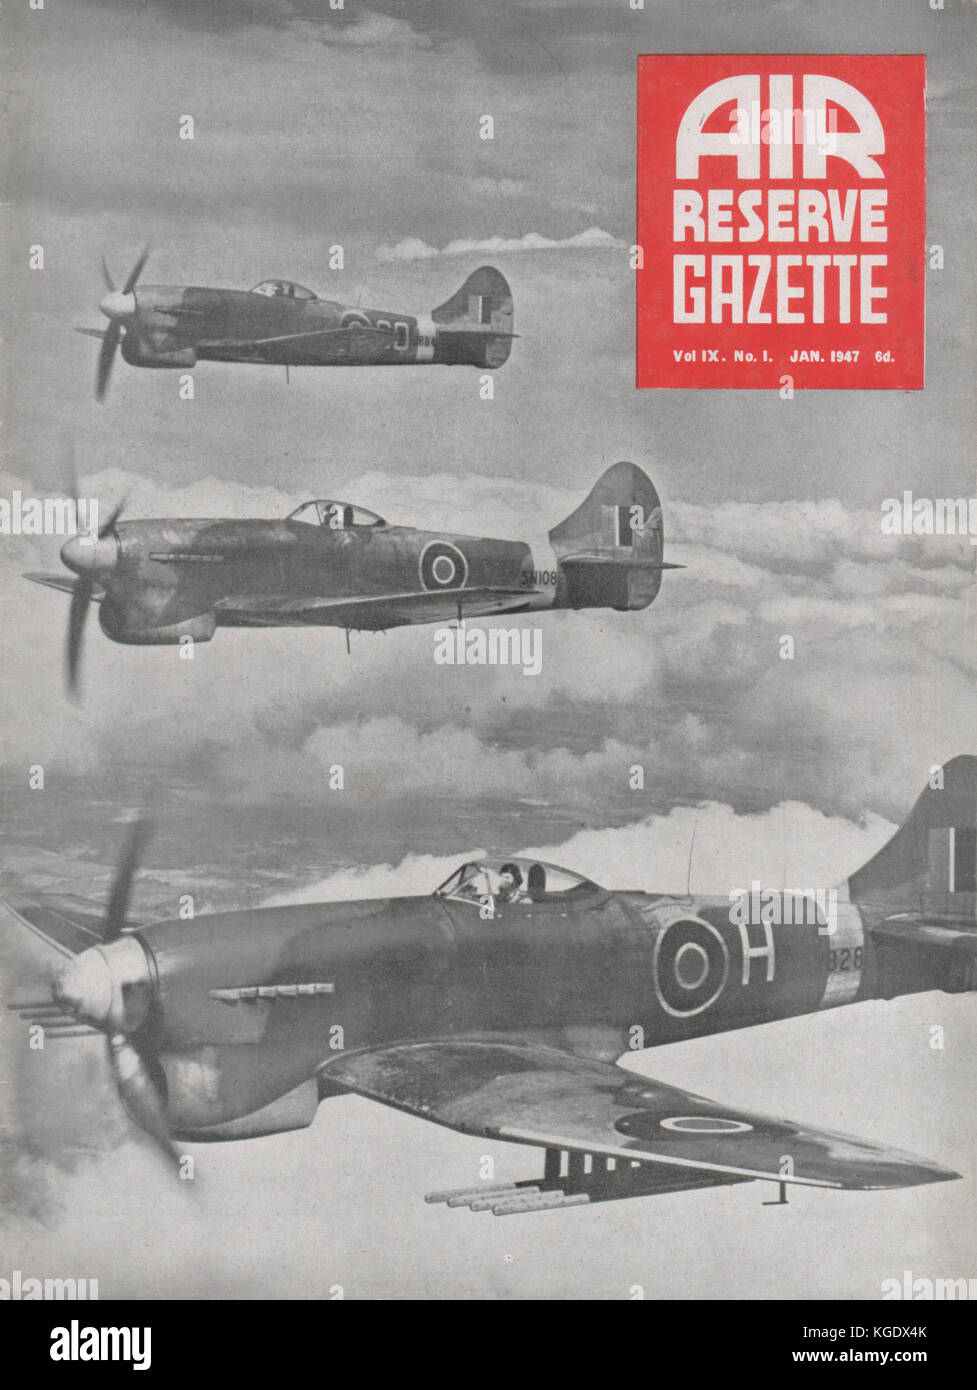 Vintage Air Reserve Gazette magazine cover dated Jan 1947 showing a flight of Hawker Typhoon fighter bombers of the world war two era. This cover is the first issue after the magazine was re-named from The Journal of the Air Training Corps Stock Photo